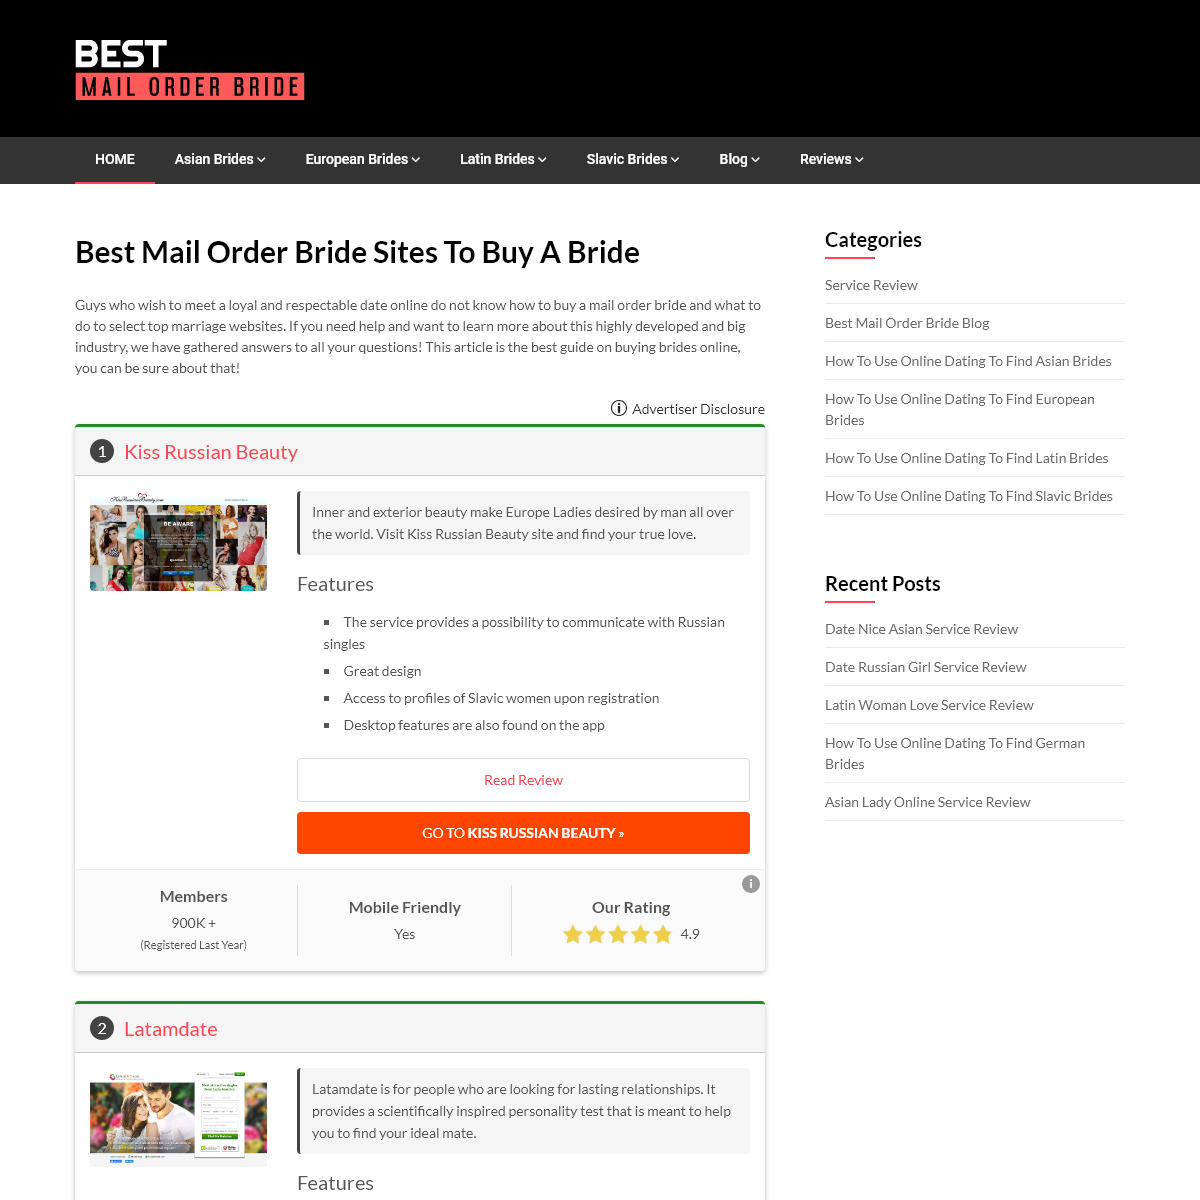 A complete backup of bestmailorderbride.net